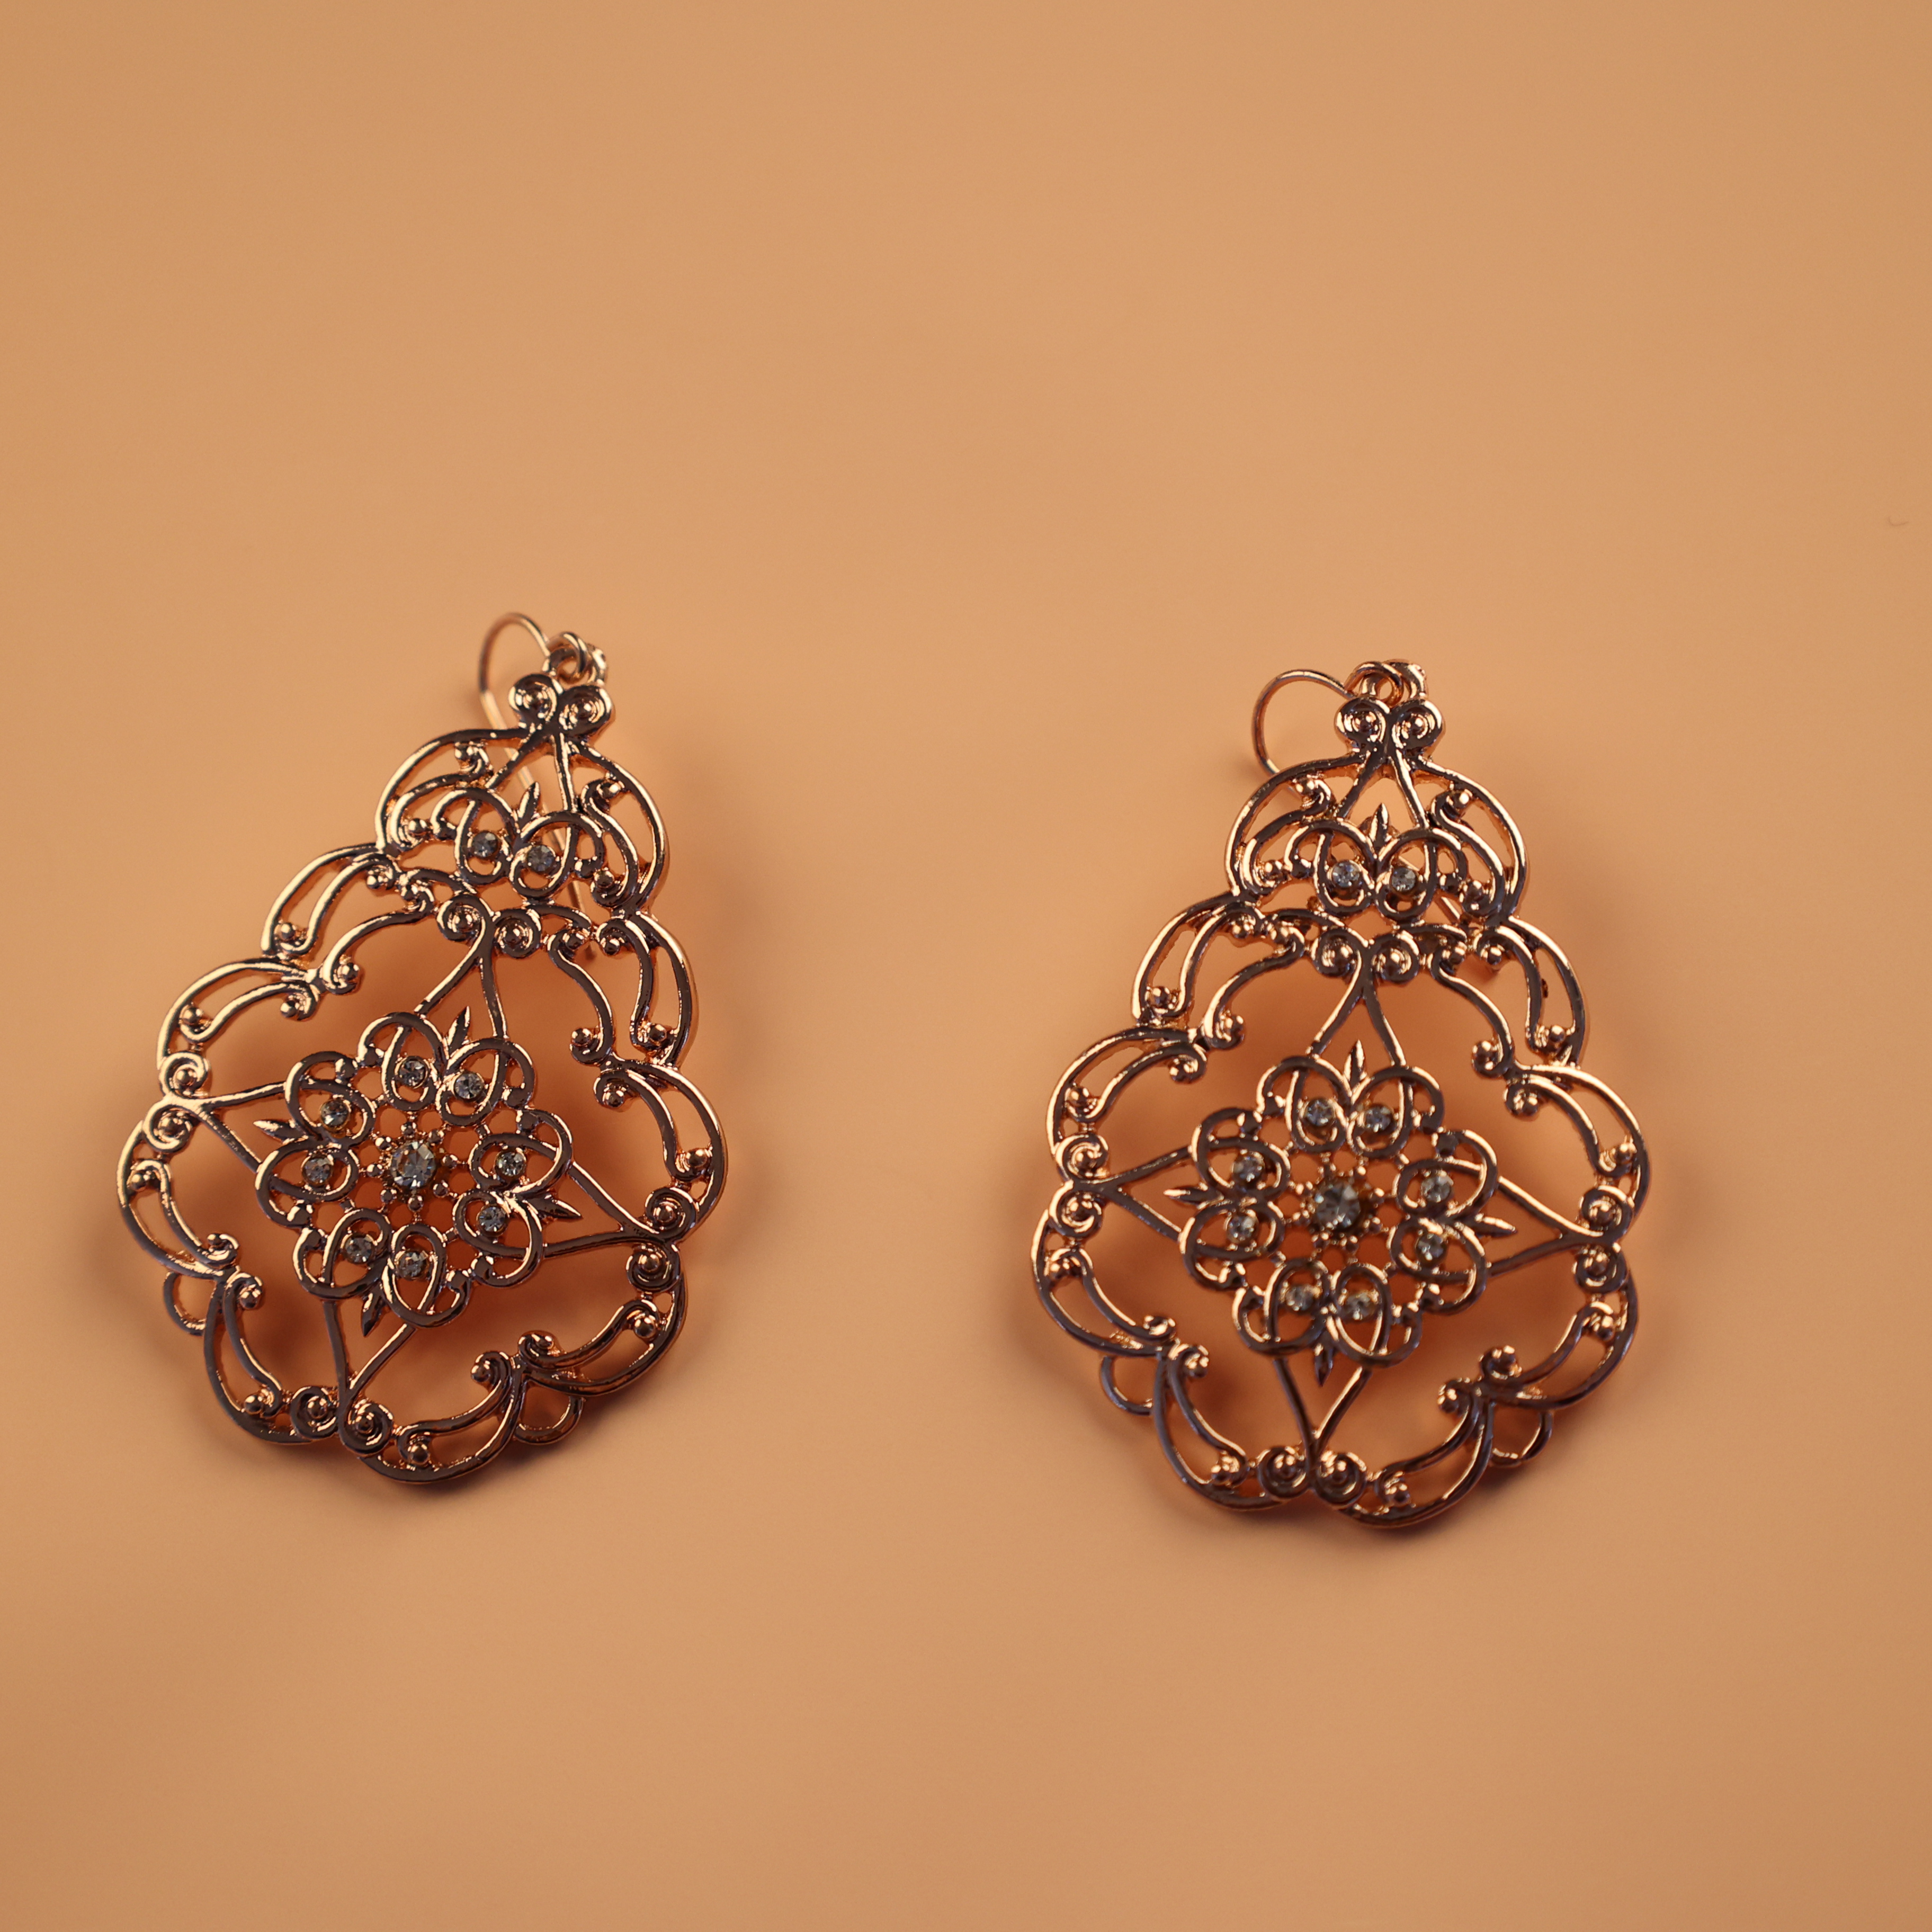 OEM Fashion Jewelry Earrings with Rhinestones Rose Gold Plated